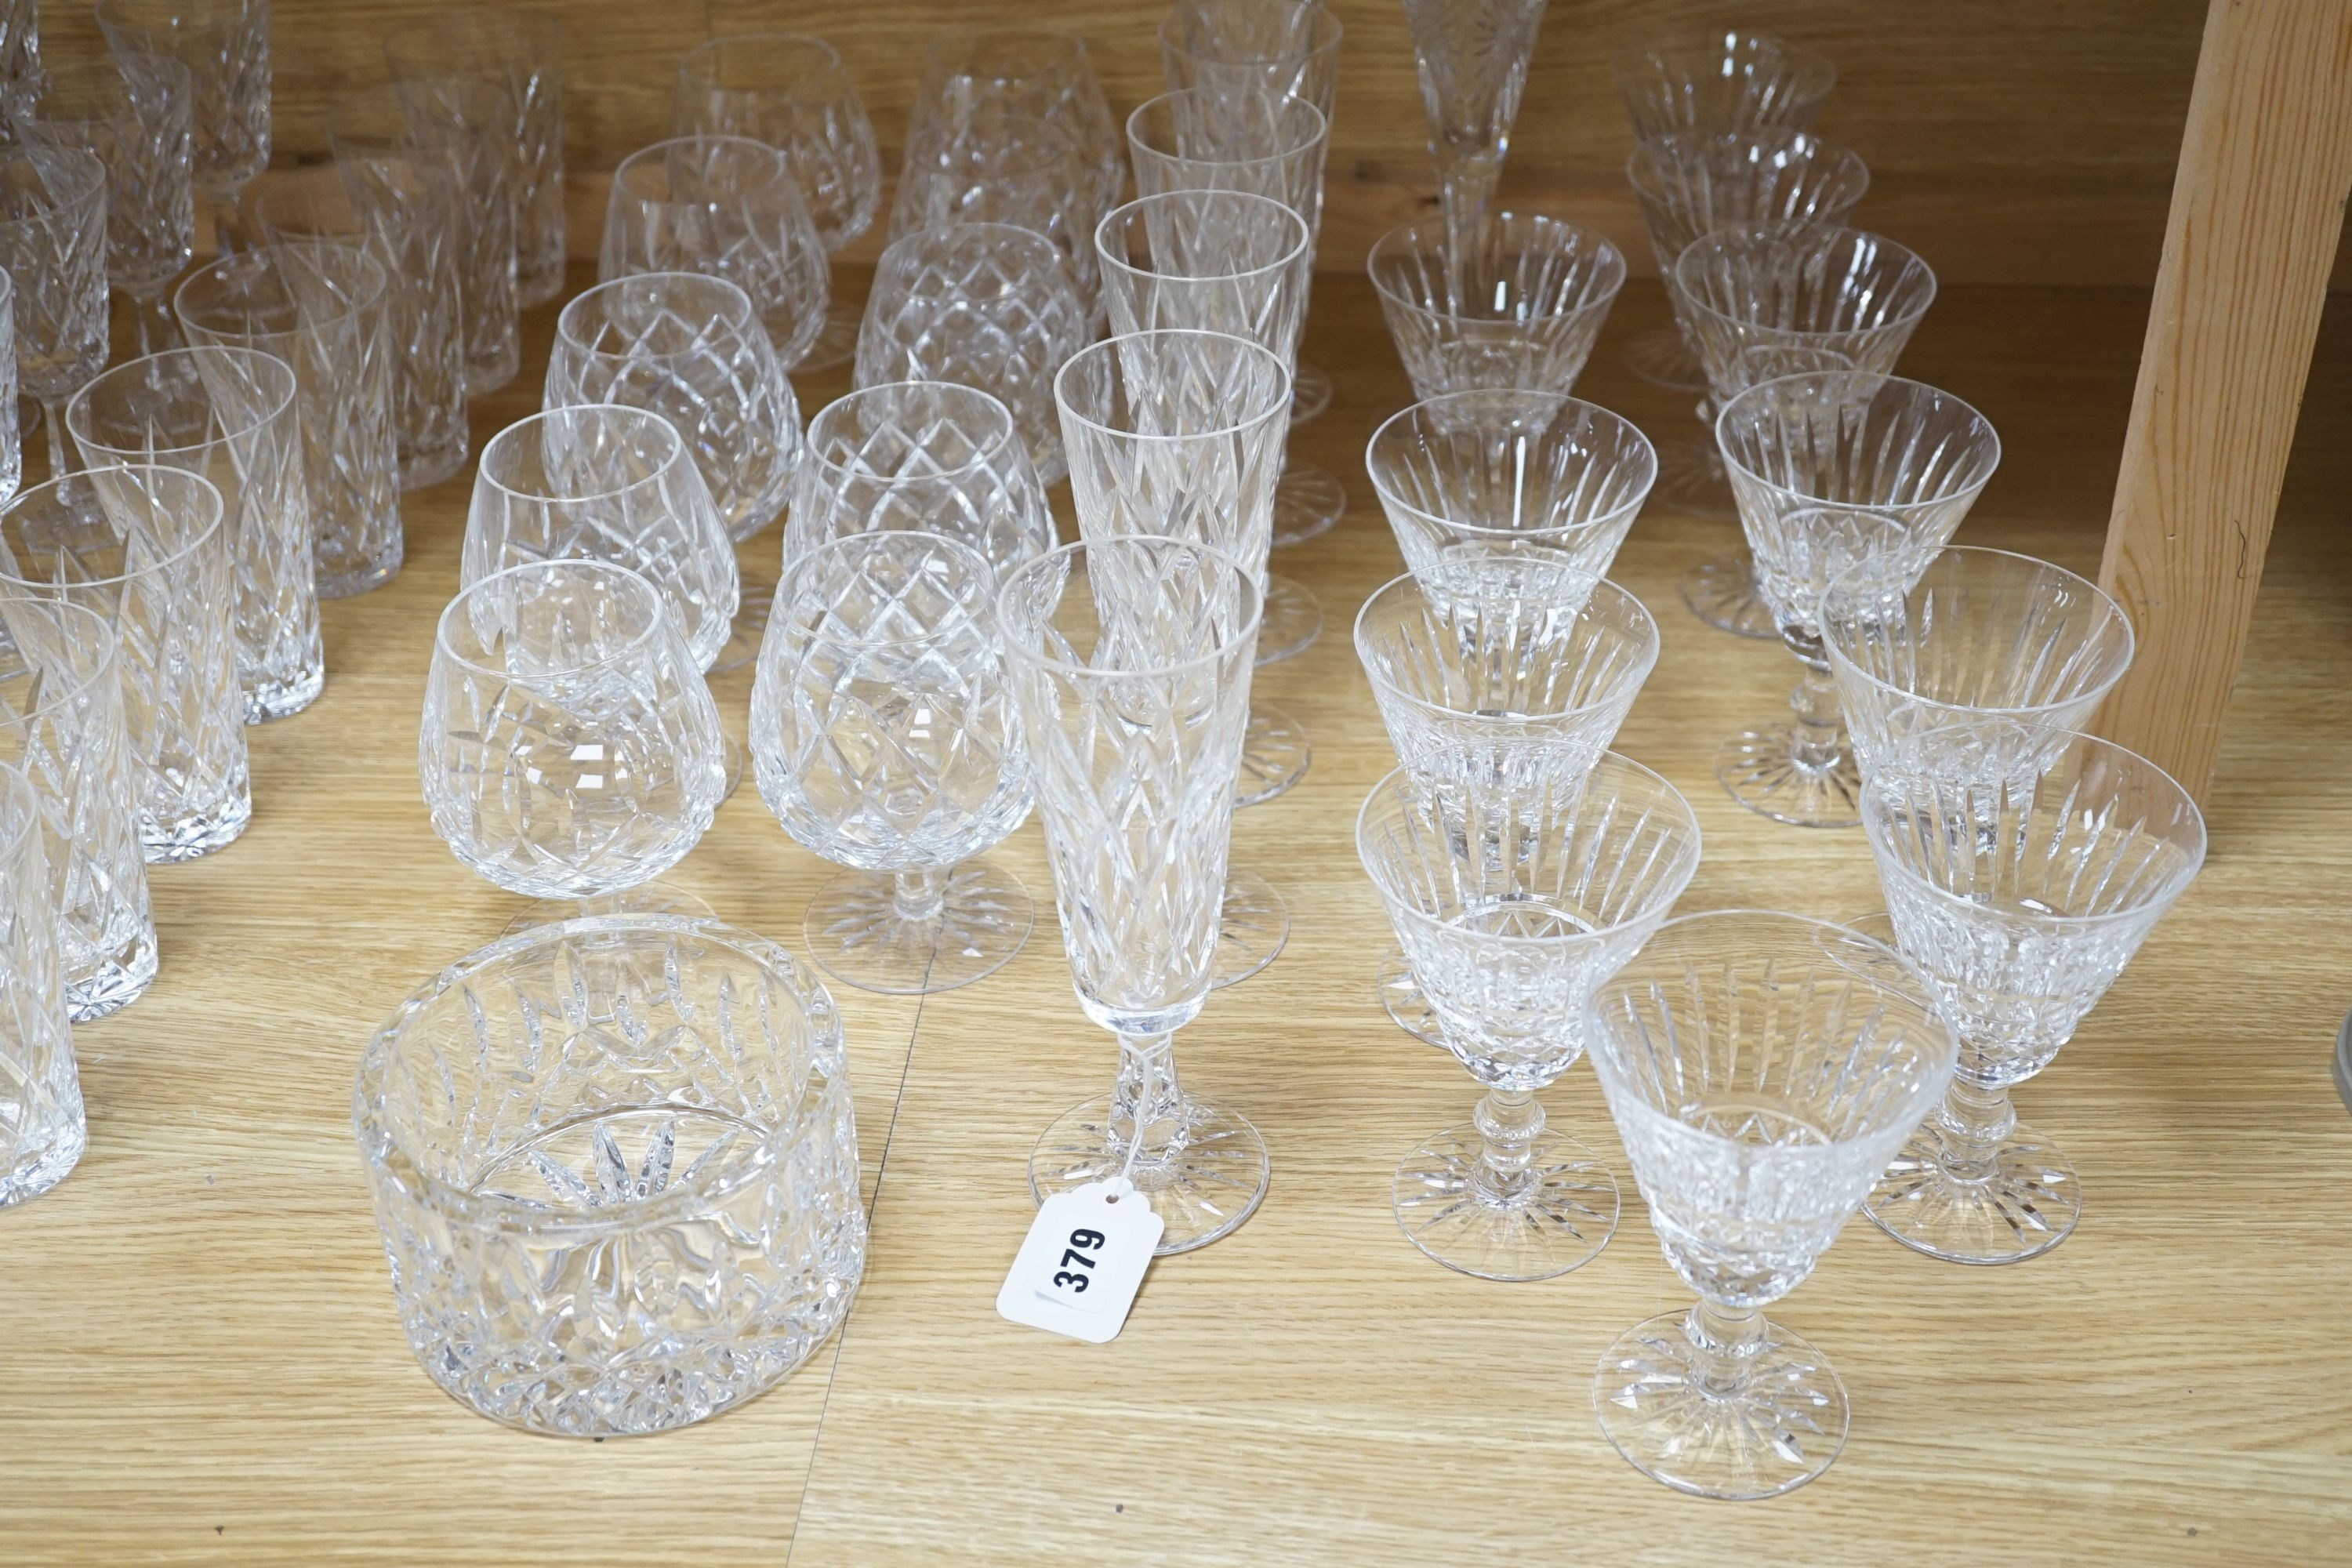 A large comprehensive suite of Waterford Tramore pattern cut crystal drinking glasses